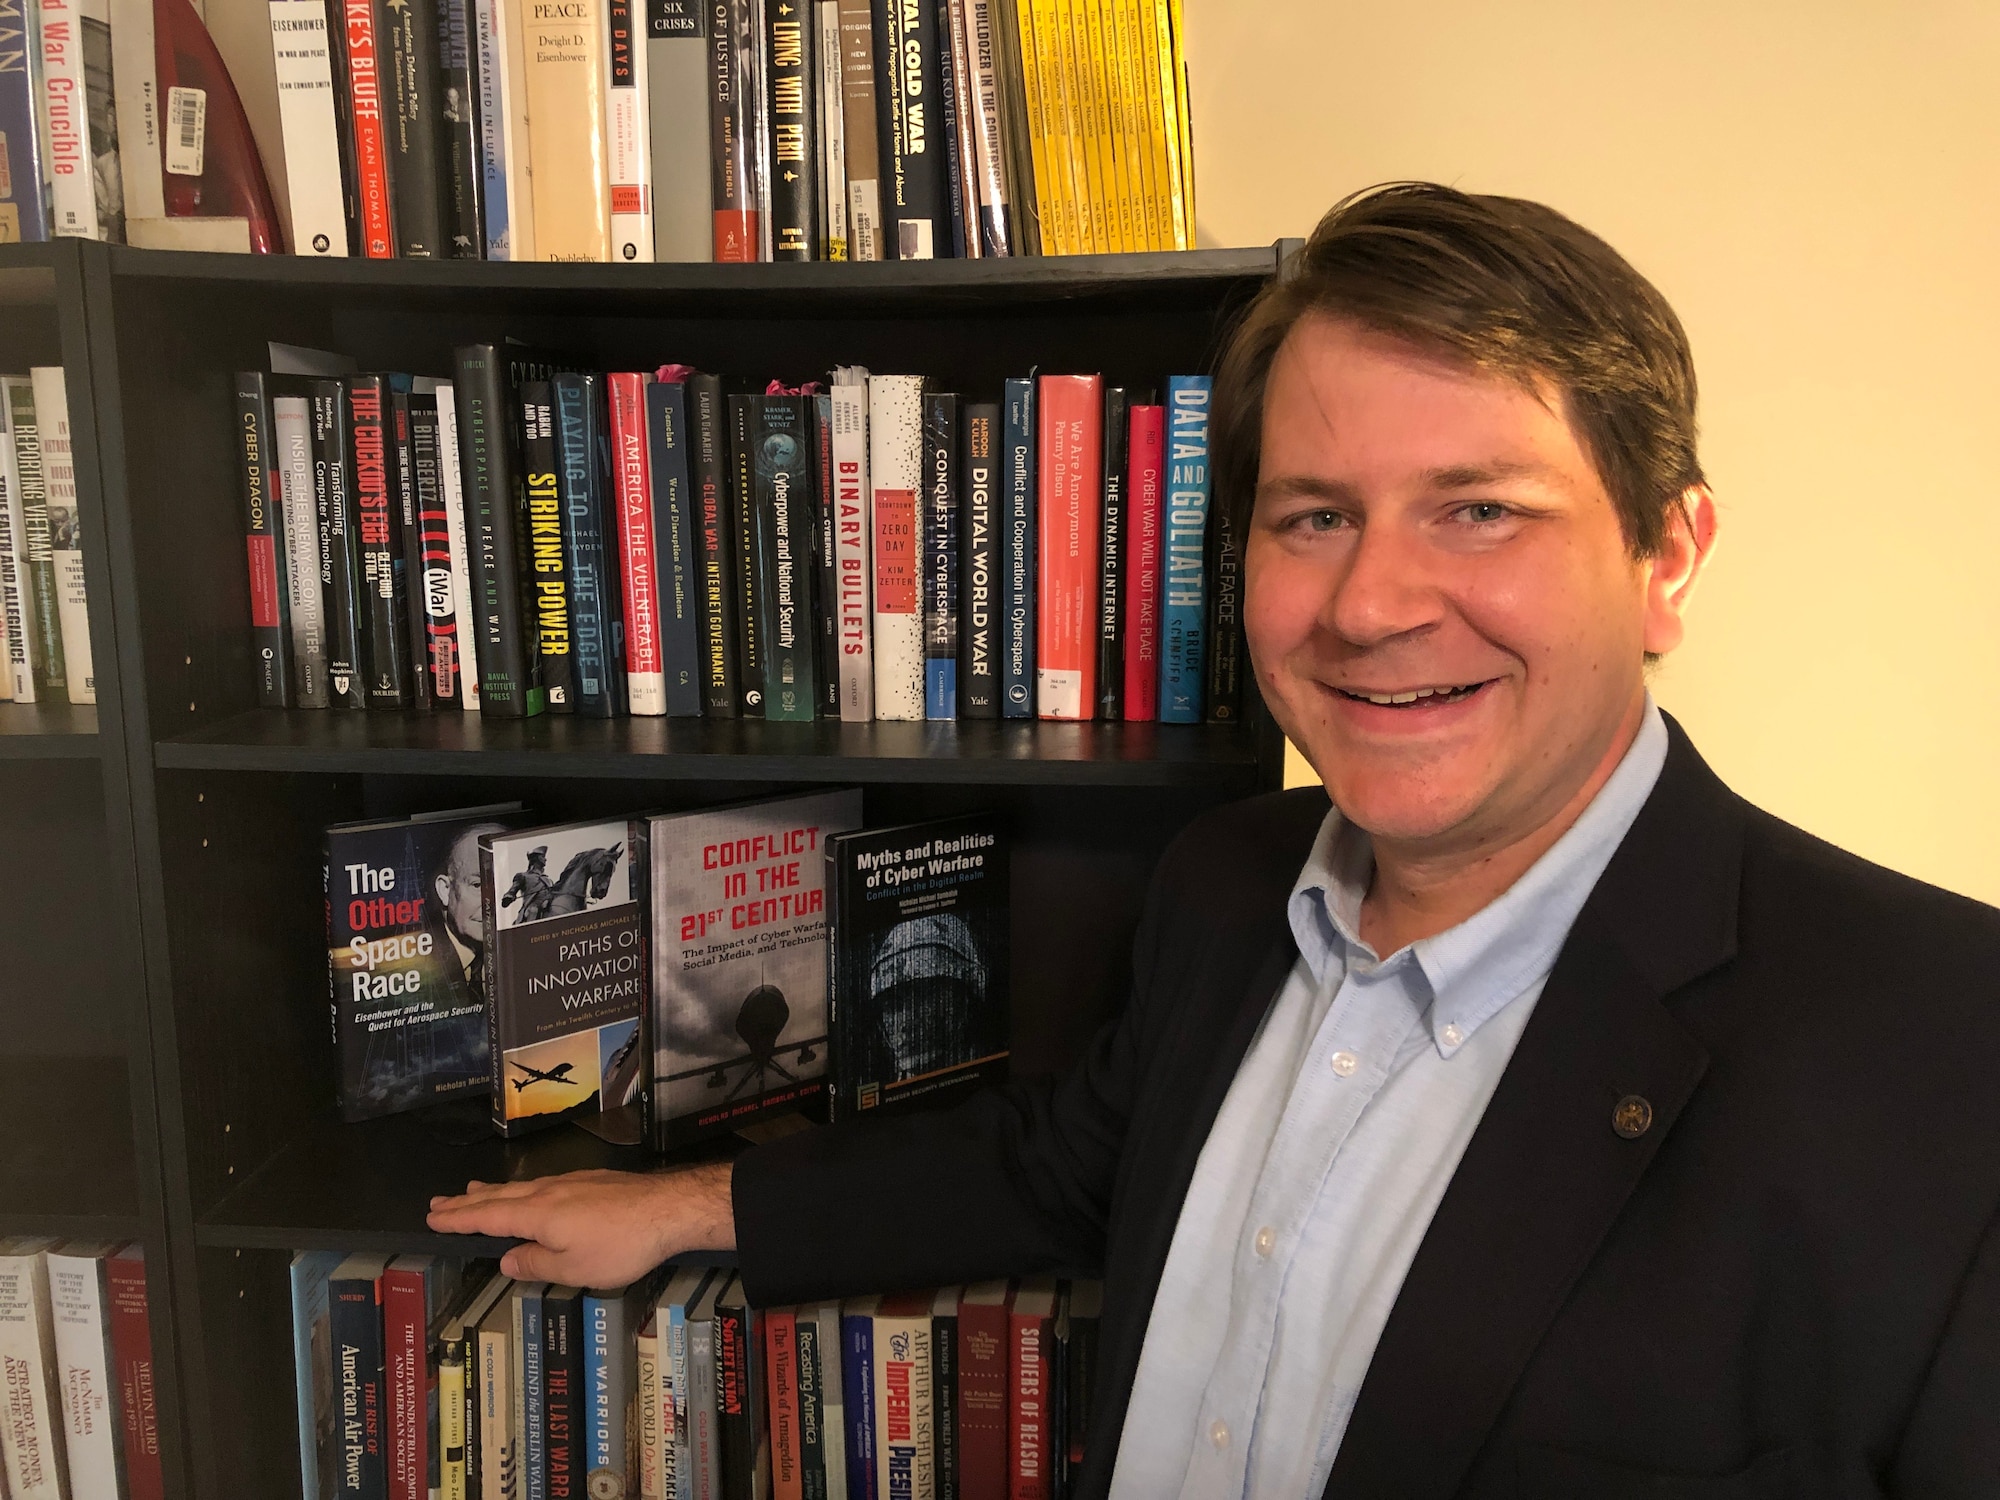 Dr. Nicholas Sambaluk, Air Command and Staff College associate professor of strategy and director of research at the eSchool of Graduate Professional Military Education, poses near a book case.